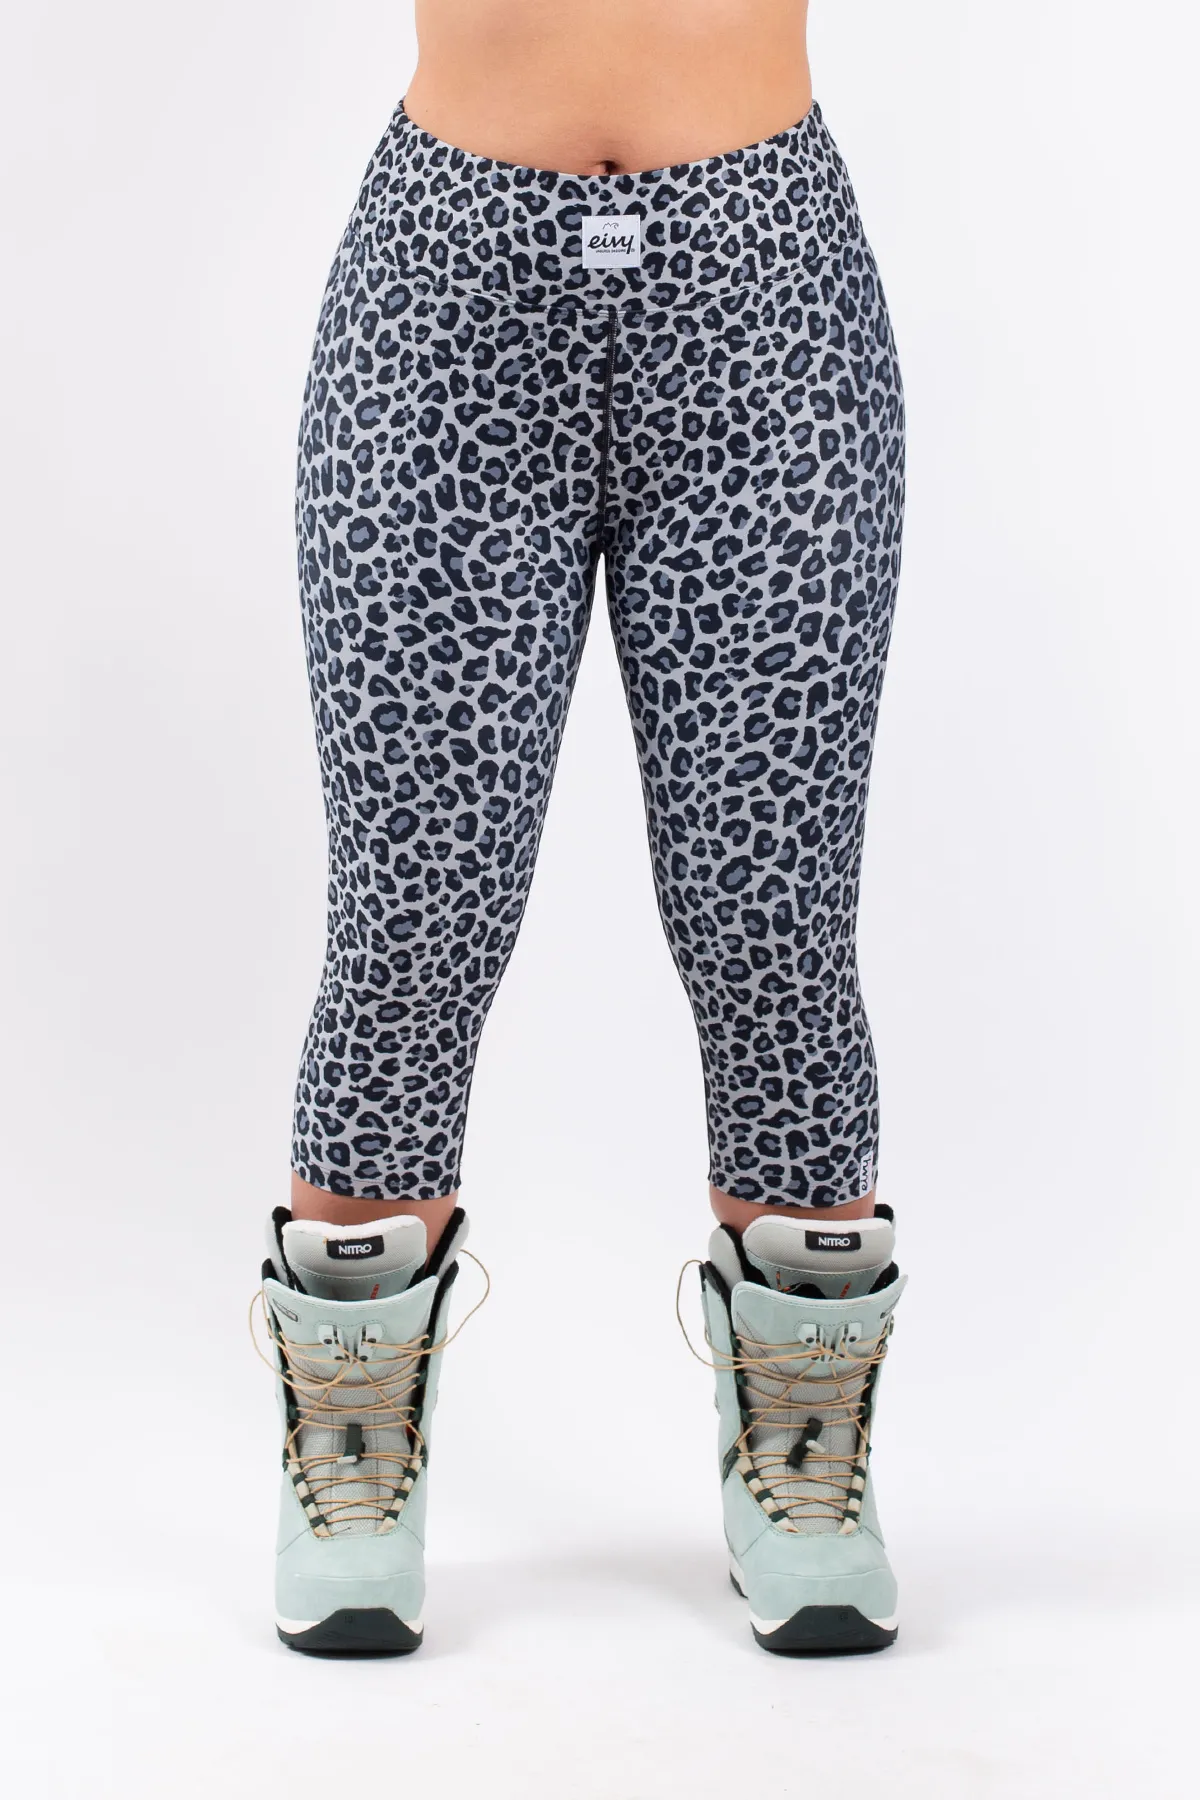 Eivy Icecold Tights Snowboard Base Layer - Leopard – CCS